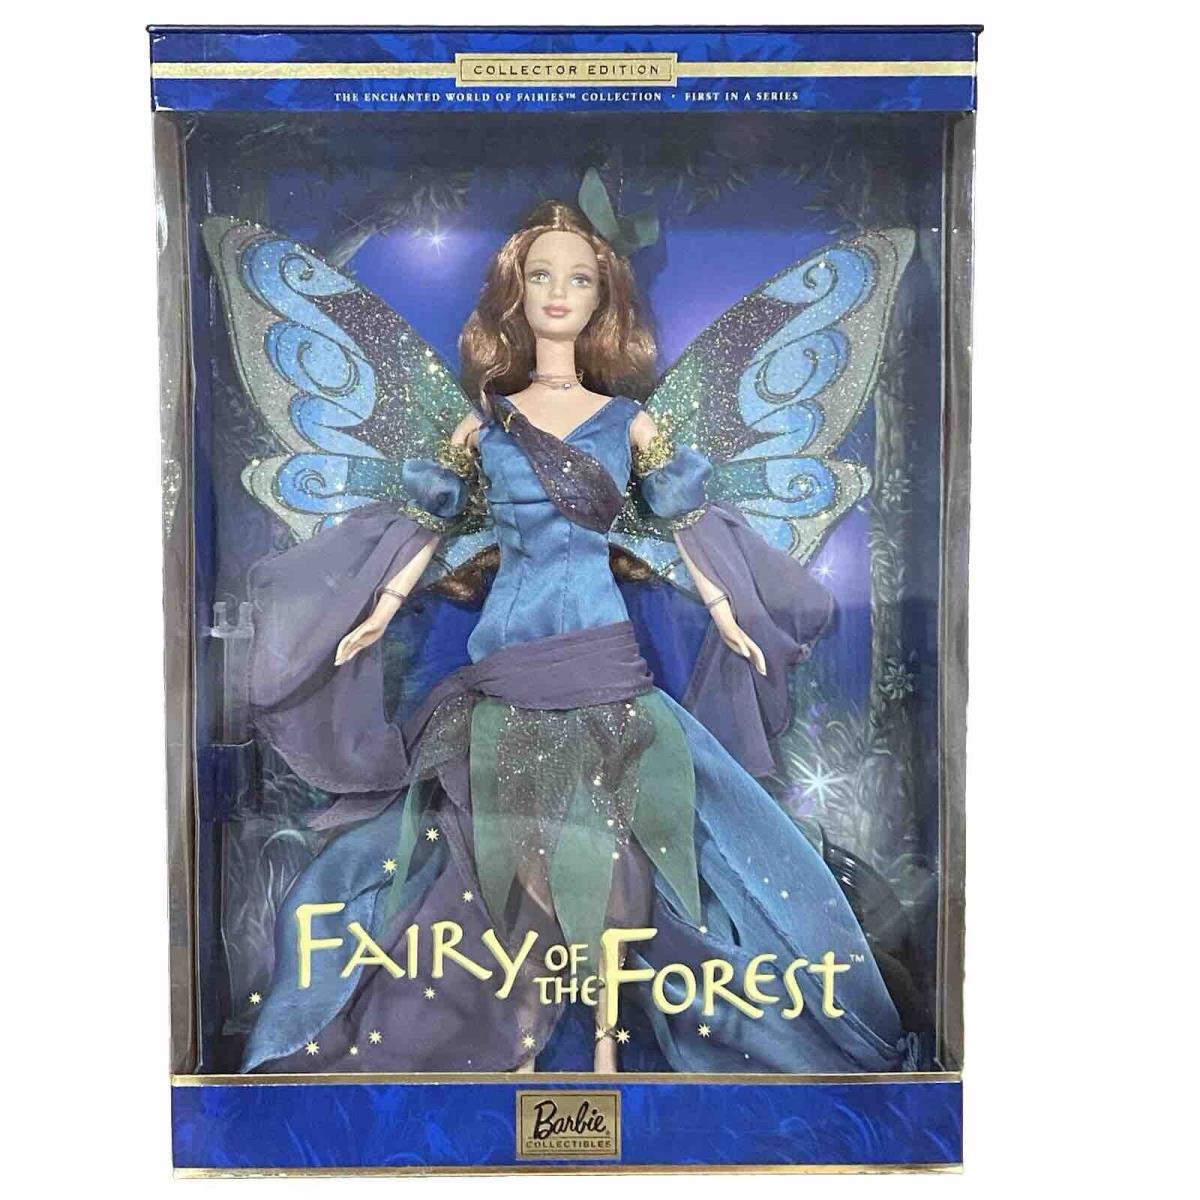 1999 Barbie Fairy of The Forest Collector Edition 1st in Series Mattel 25639